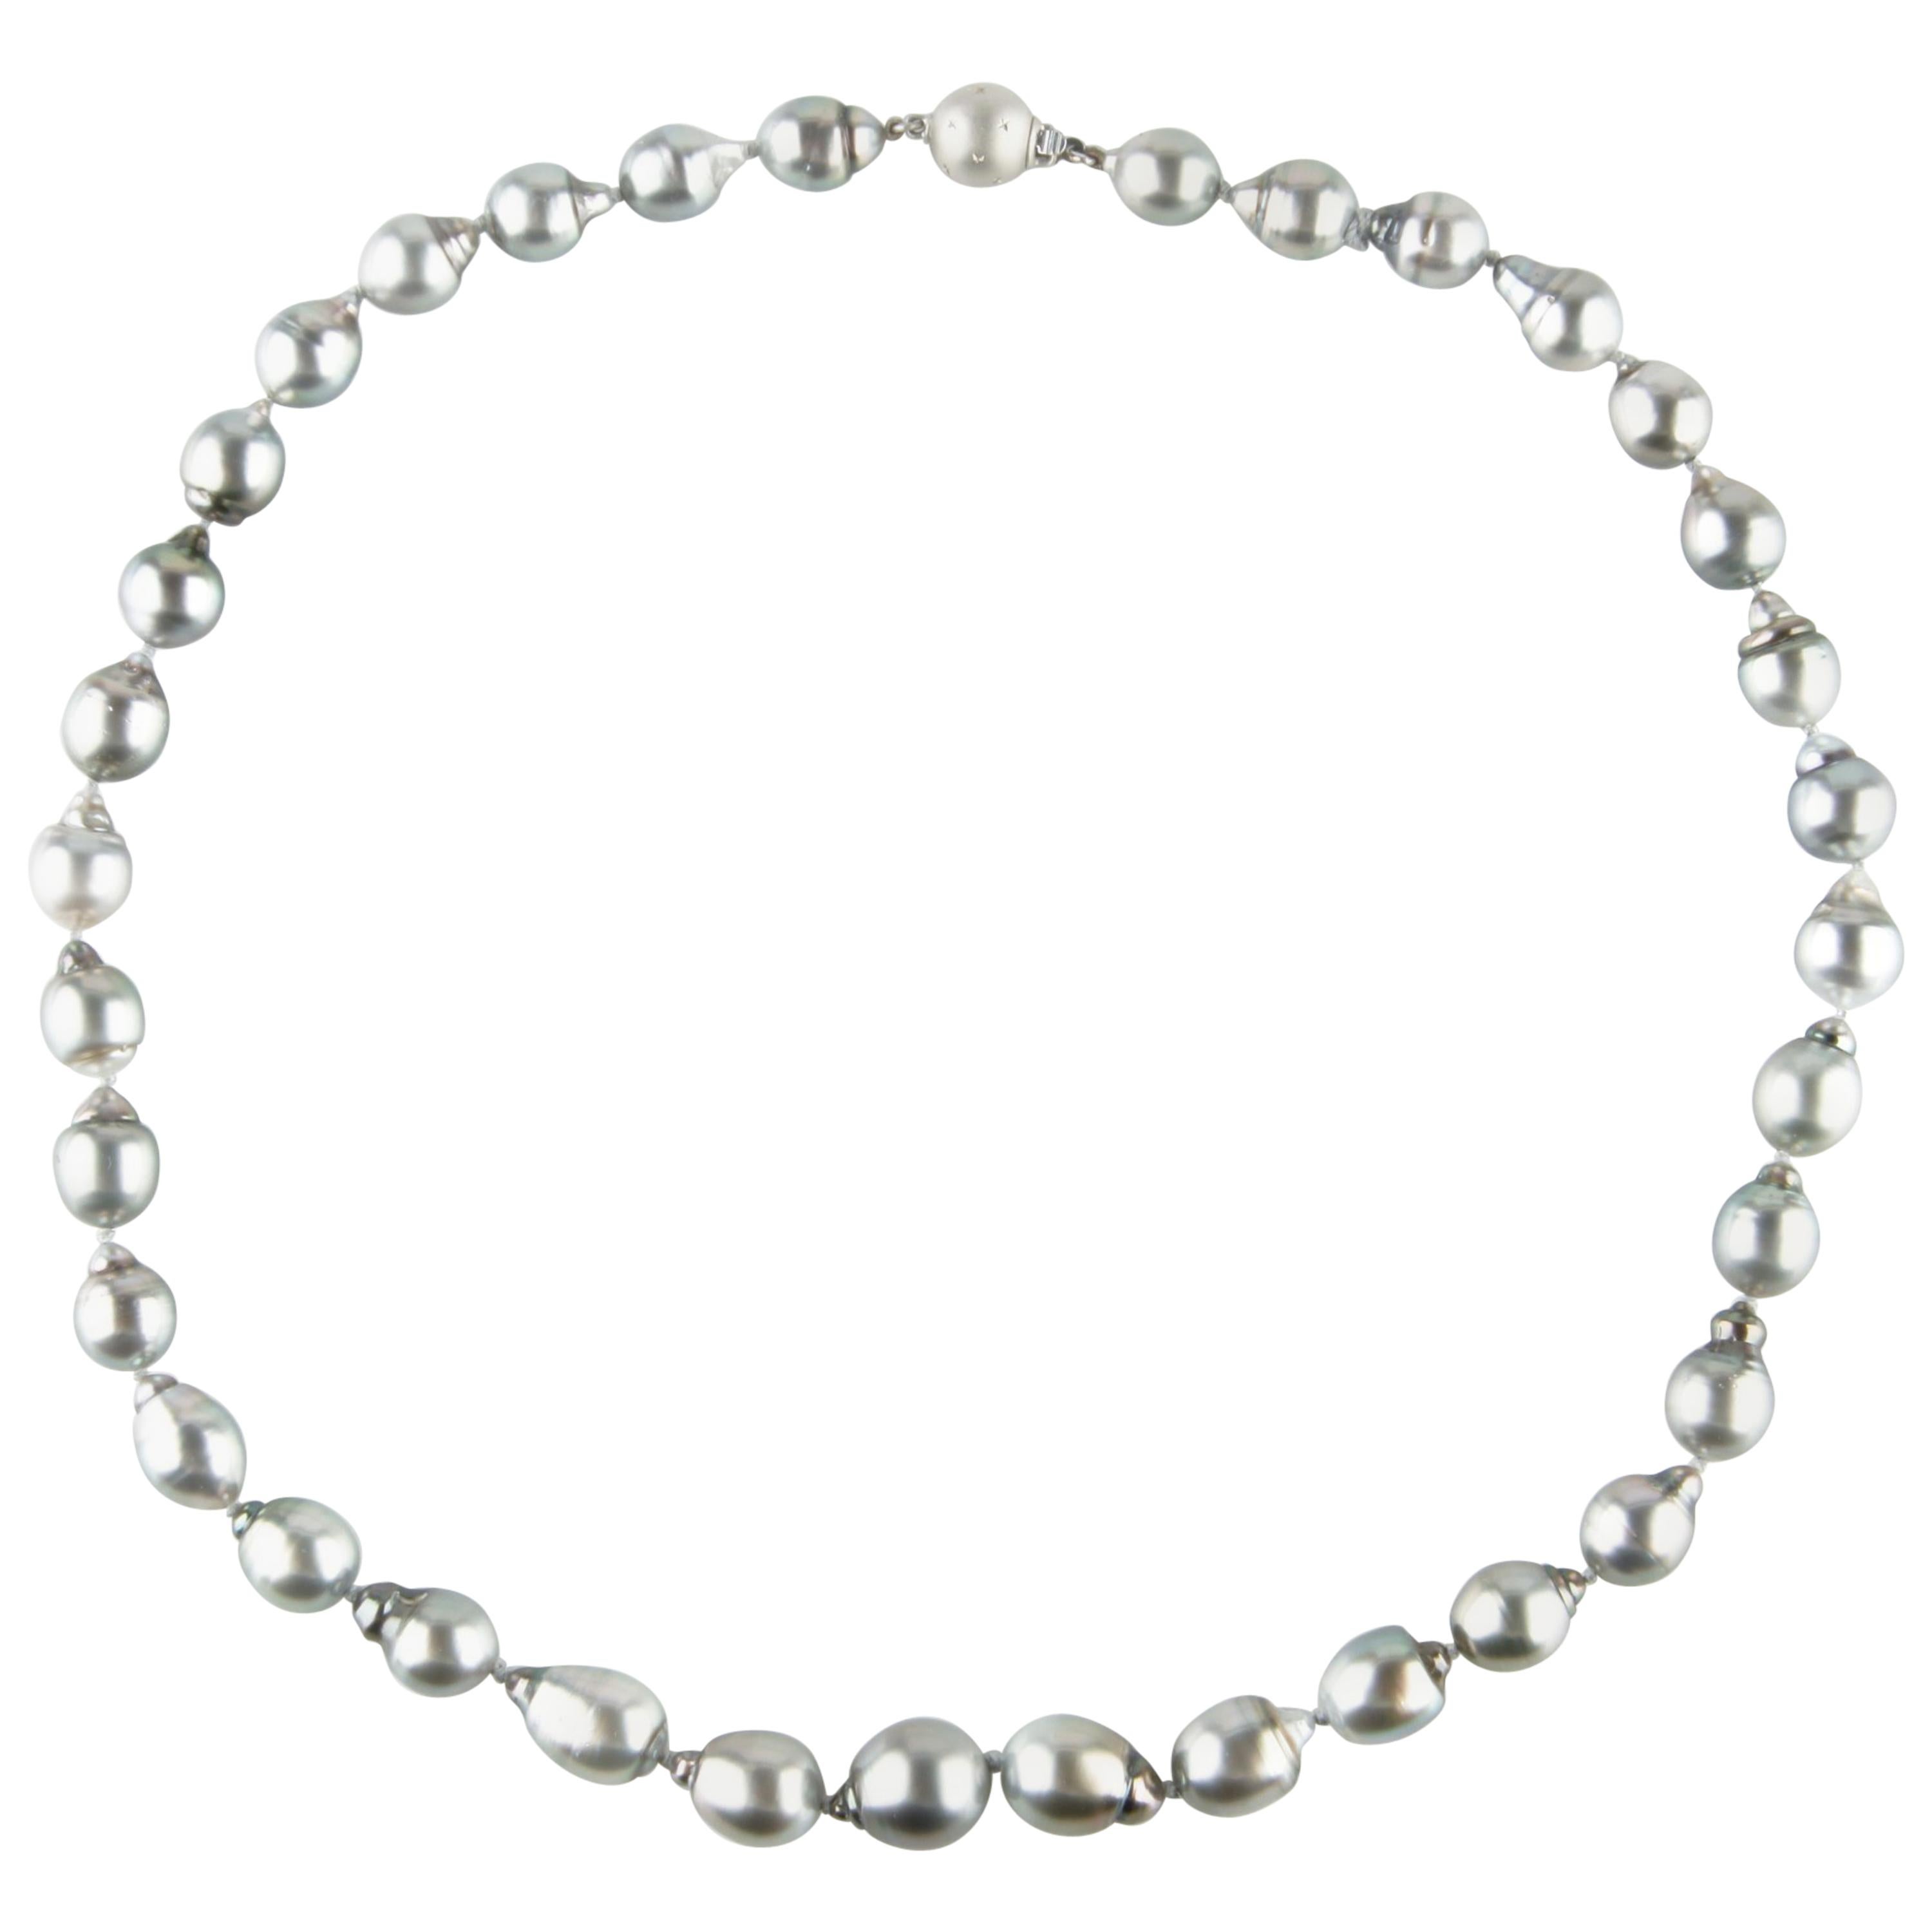 Baroque Tahitian Black Pearl Strand with 14 Karat White Gold Clasp